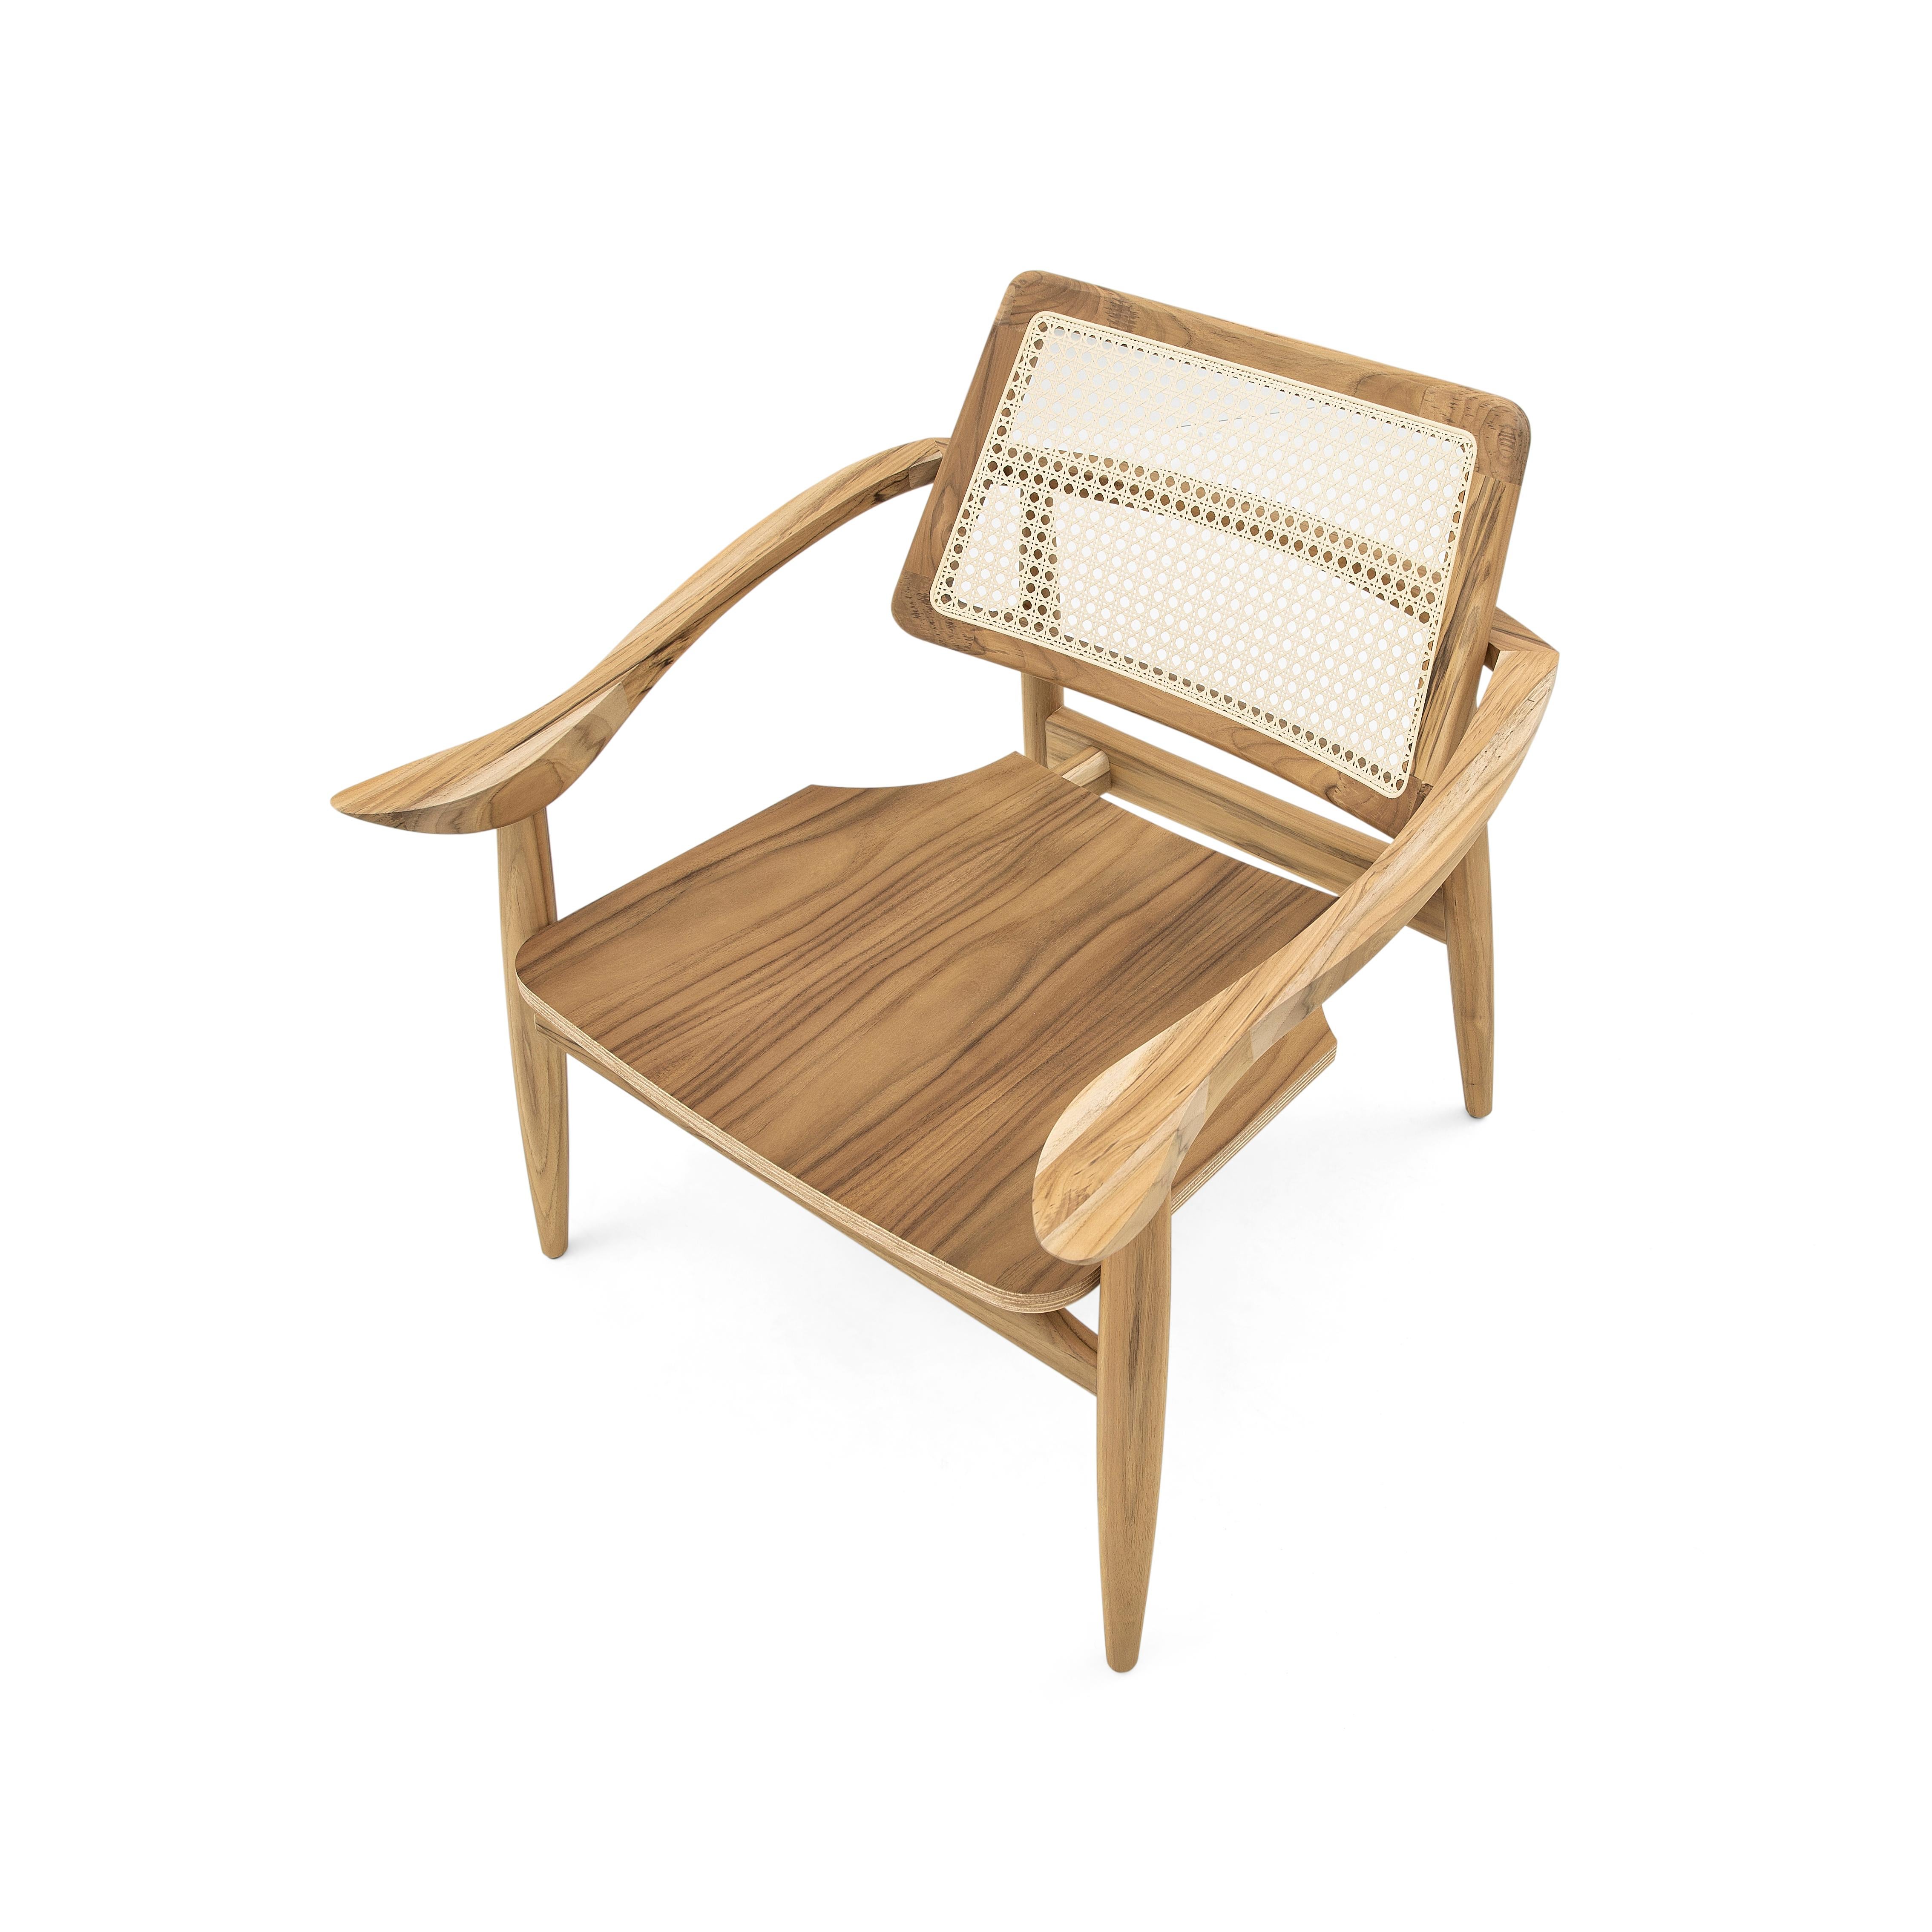 Turn Armchair Cane-Back Chair with Shaped Wooden Seat in Teak Wood Finish For Sale 5